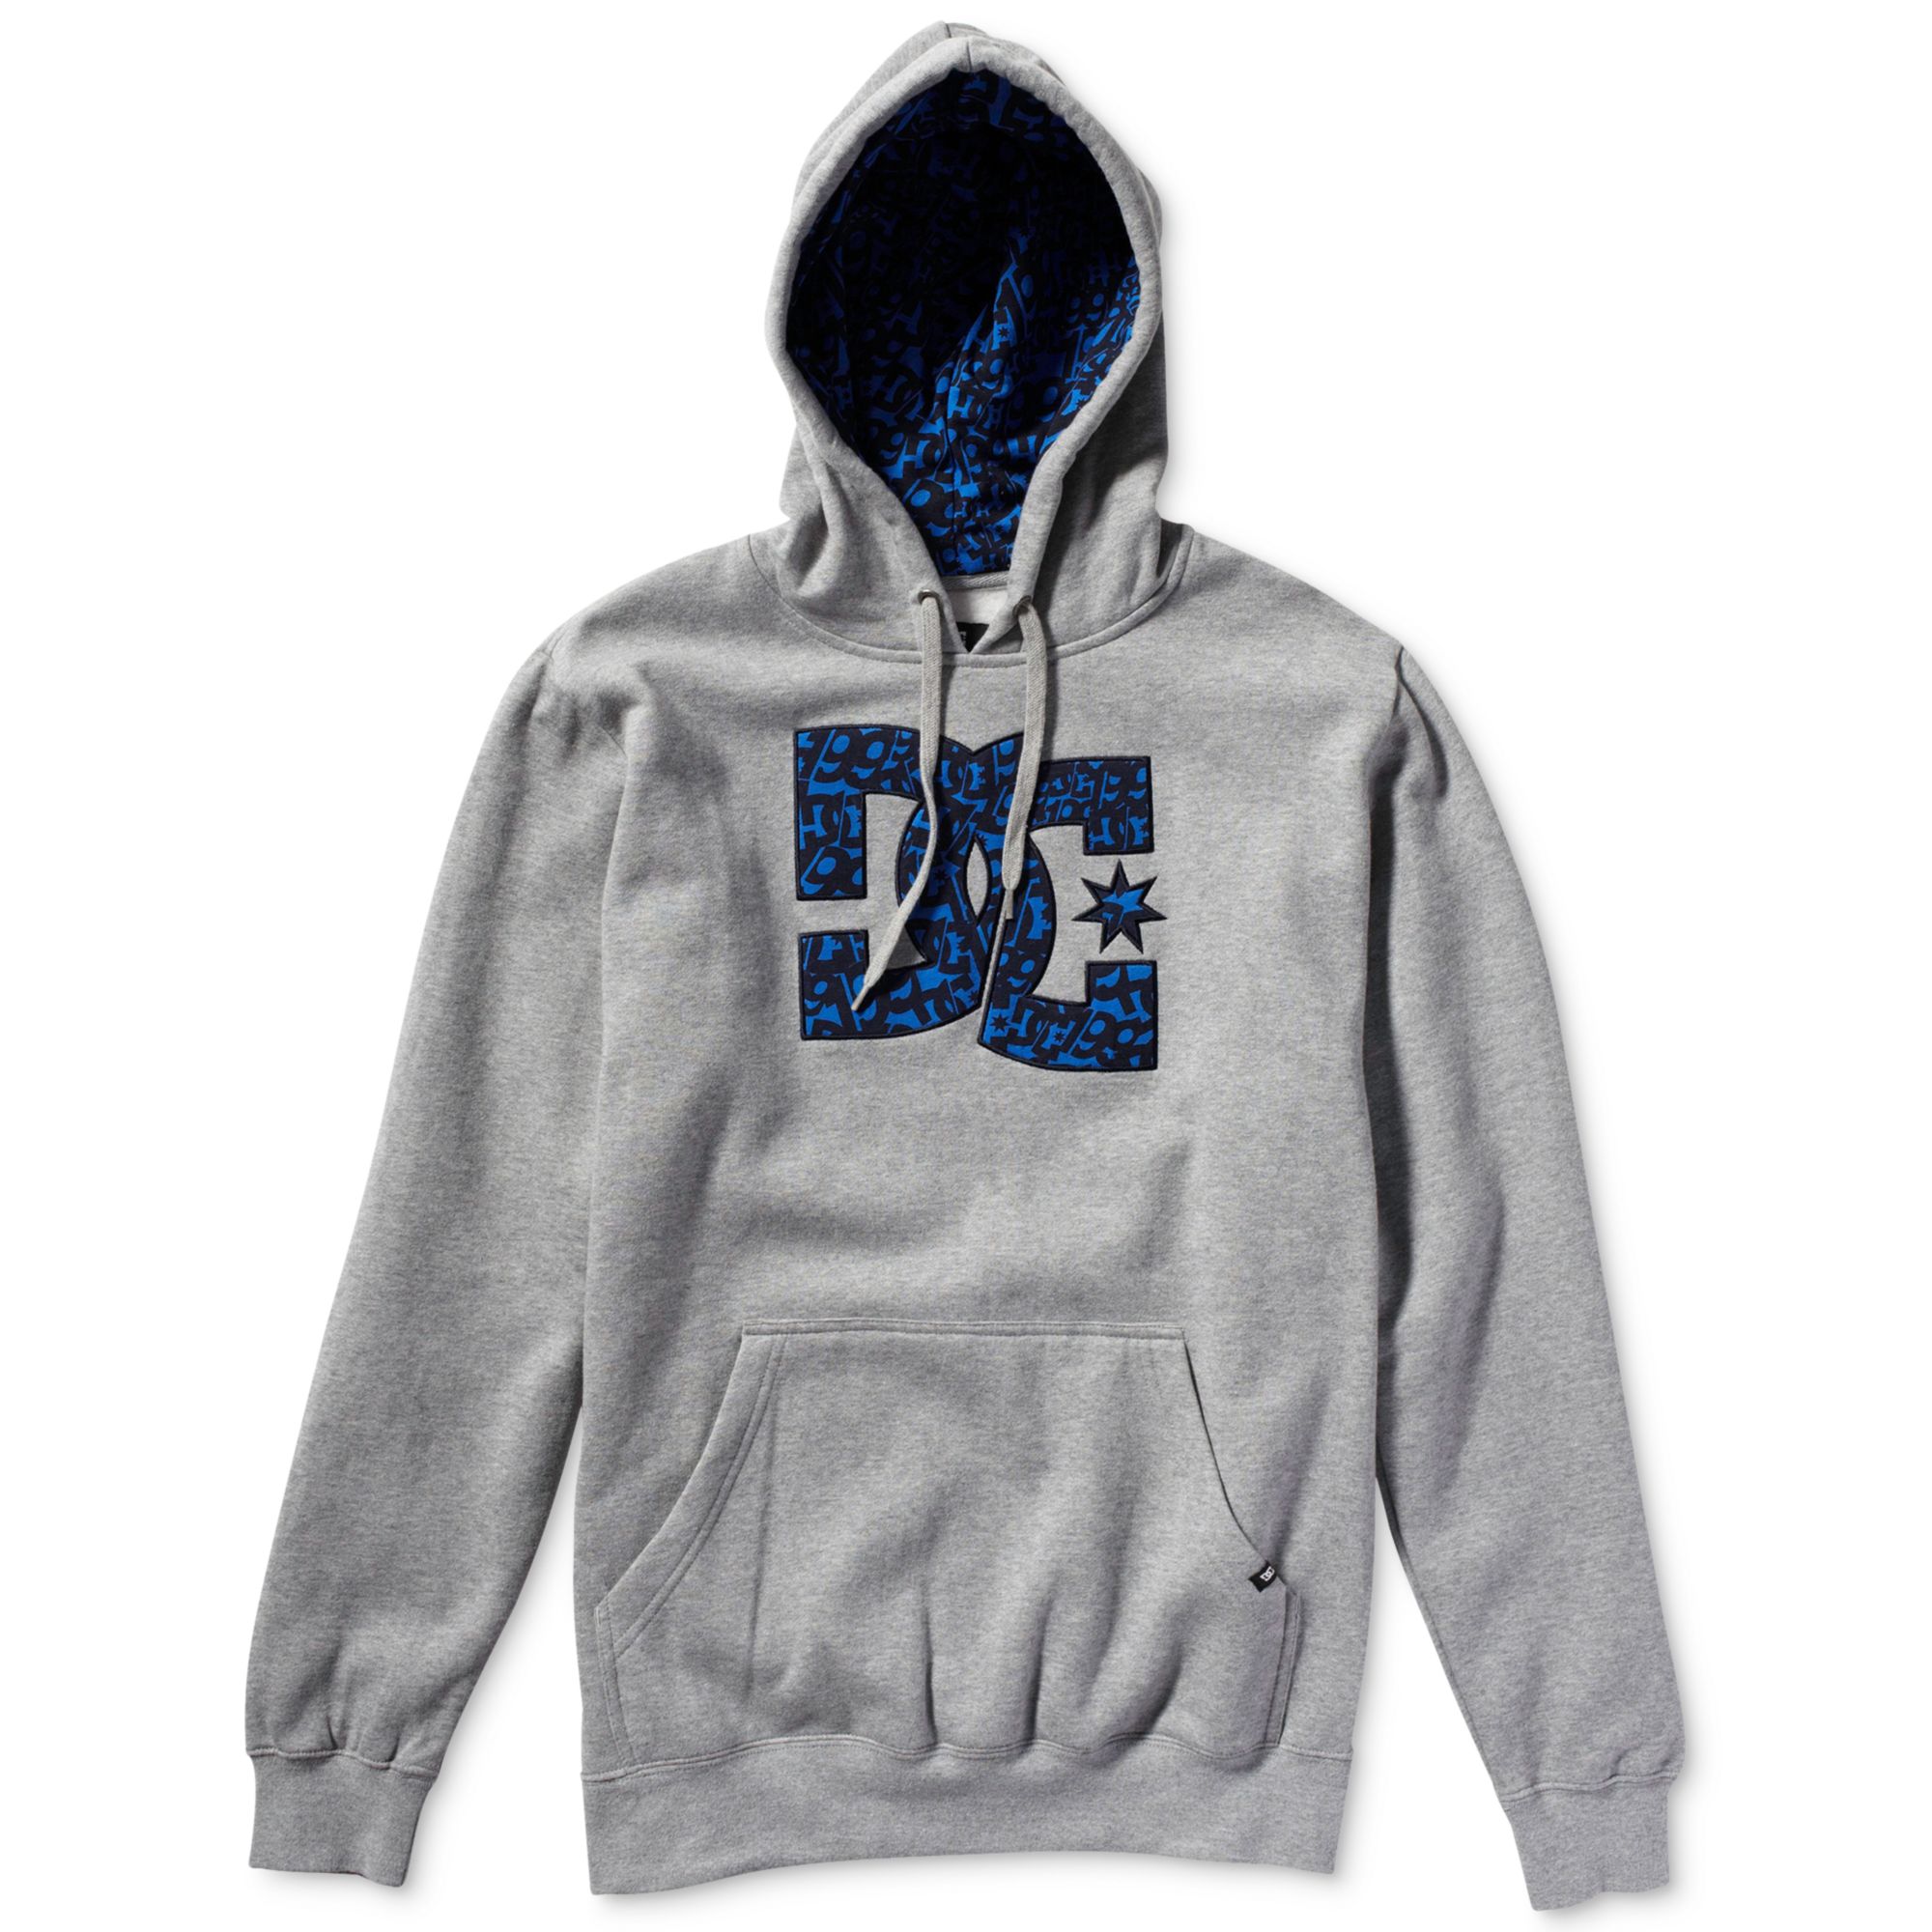 Lyst - Dc Shoes Pullover Graphic Hoodie in Gray for Men